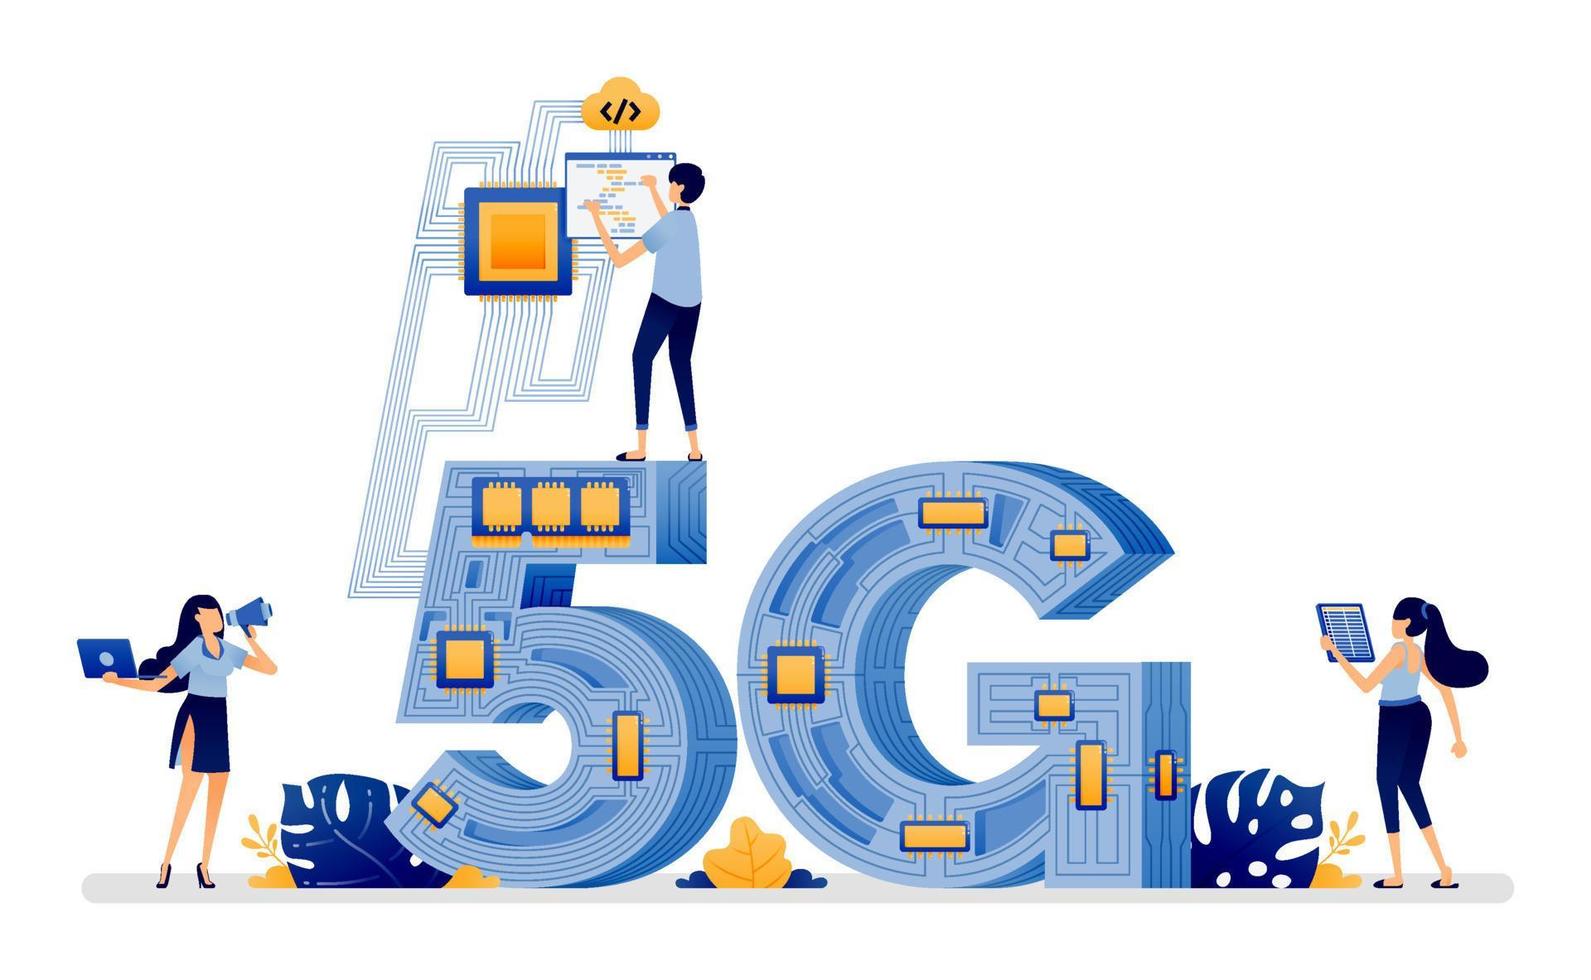 Illustration design of 5g with optical network cables that surround and stick together to form a network. Vector can be used to web, website, poster, mobile apps, brochure ads, flyer, business card